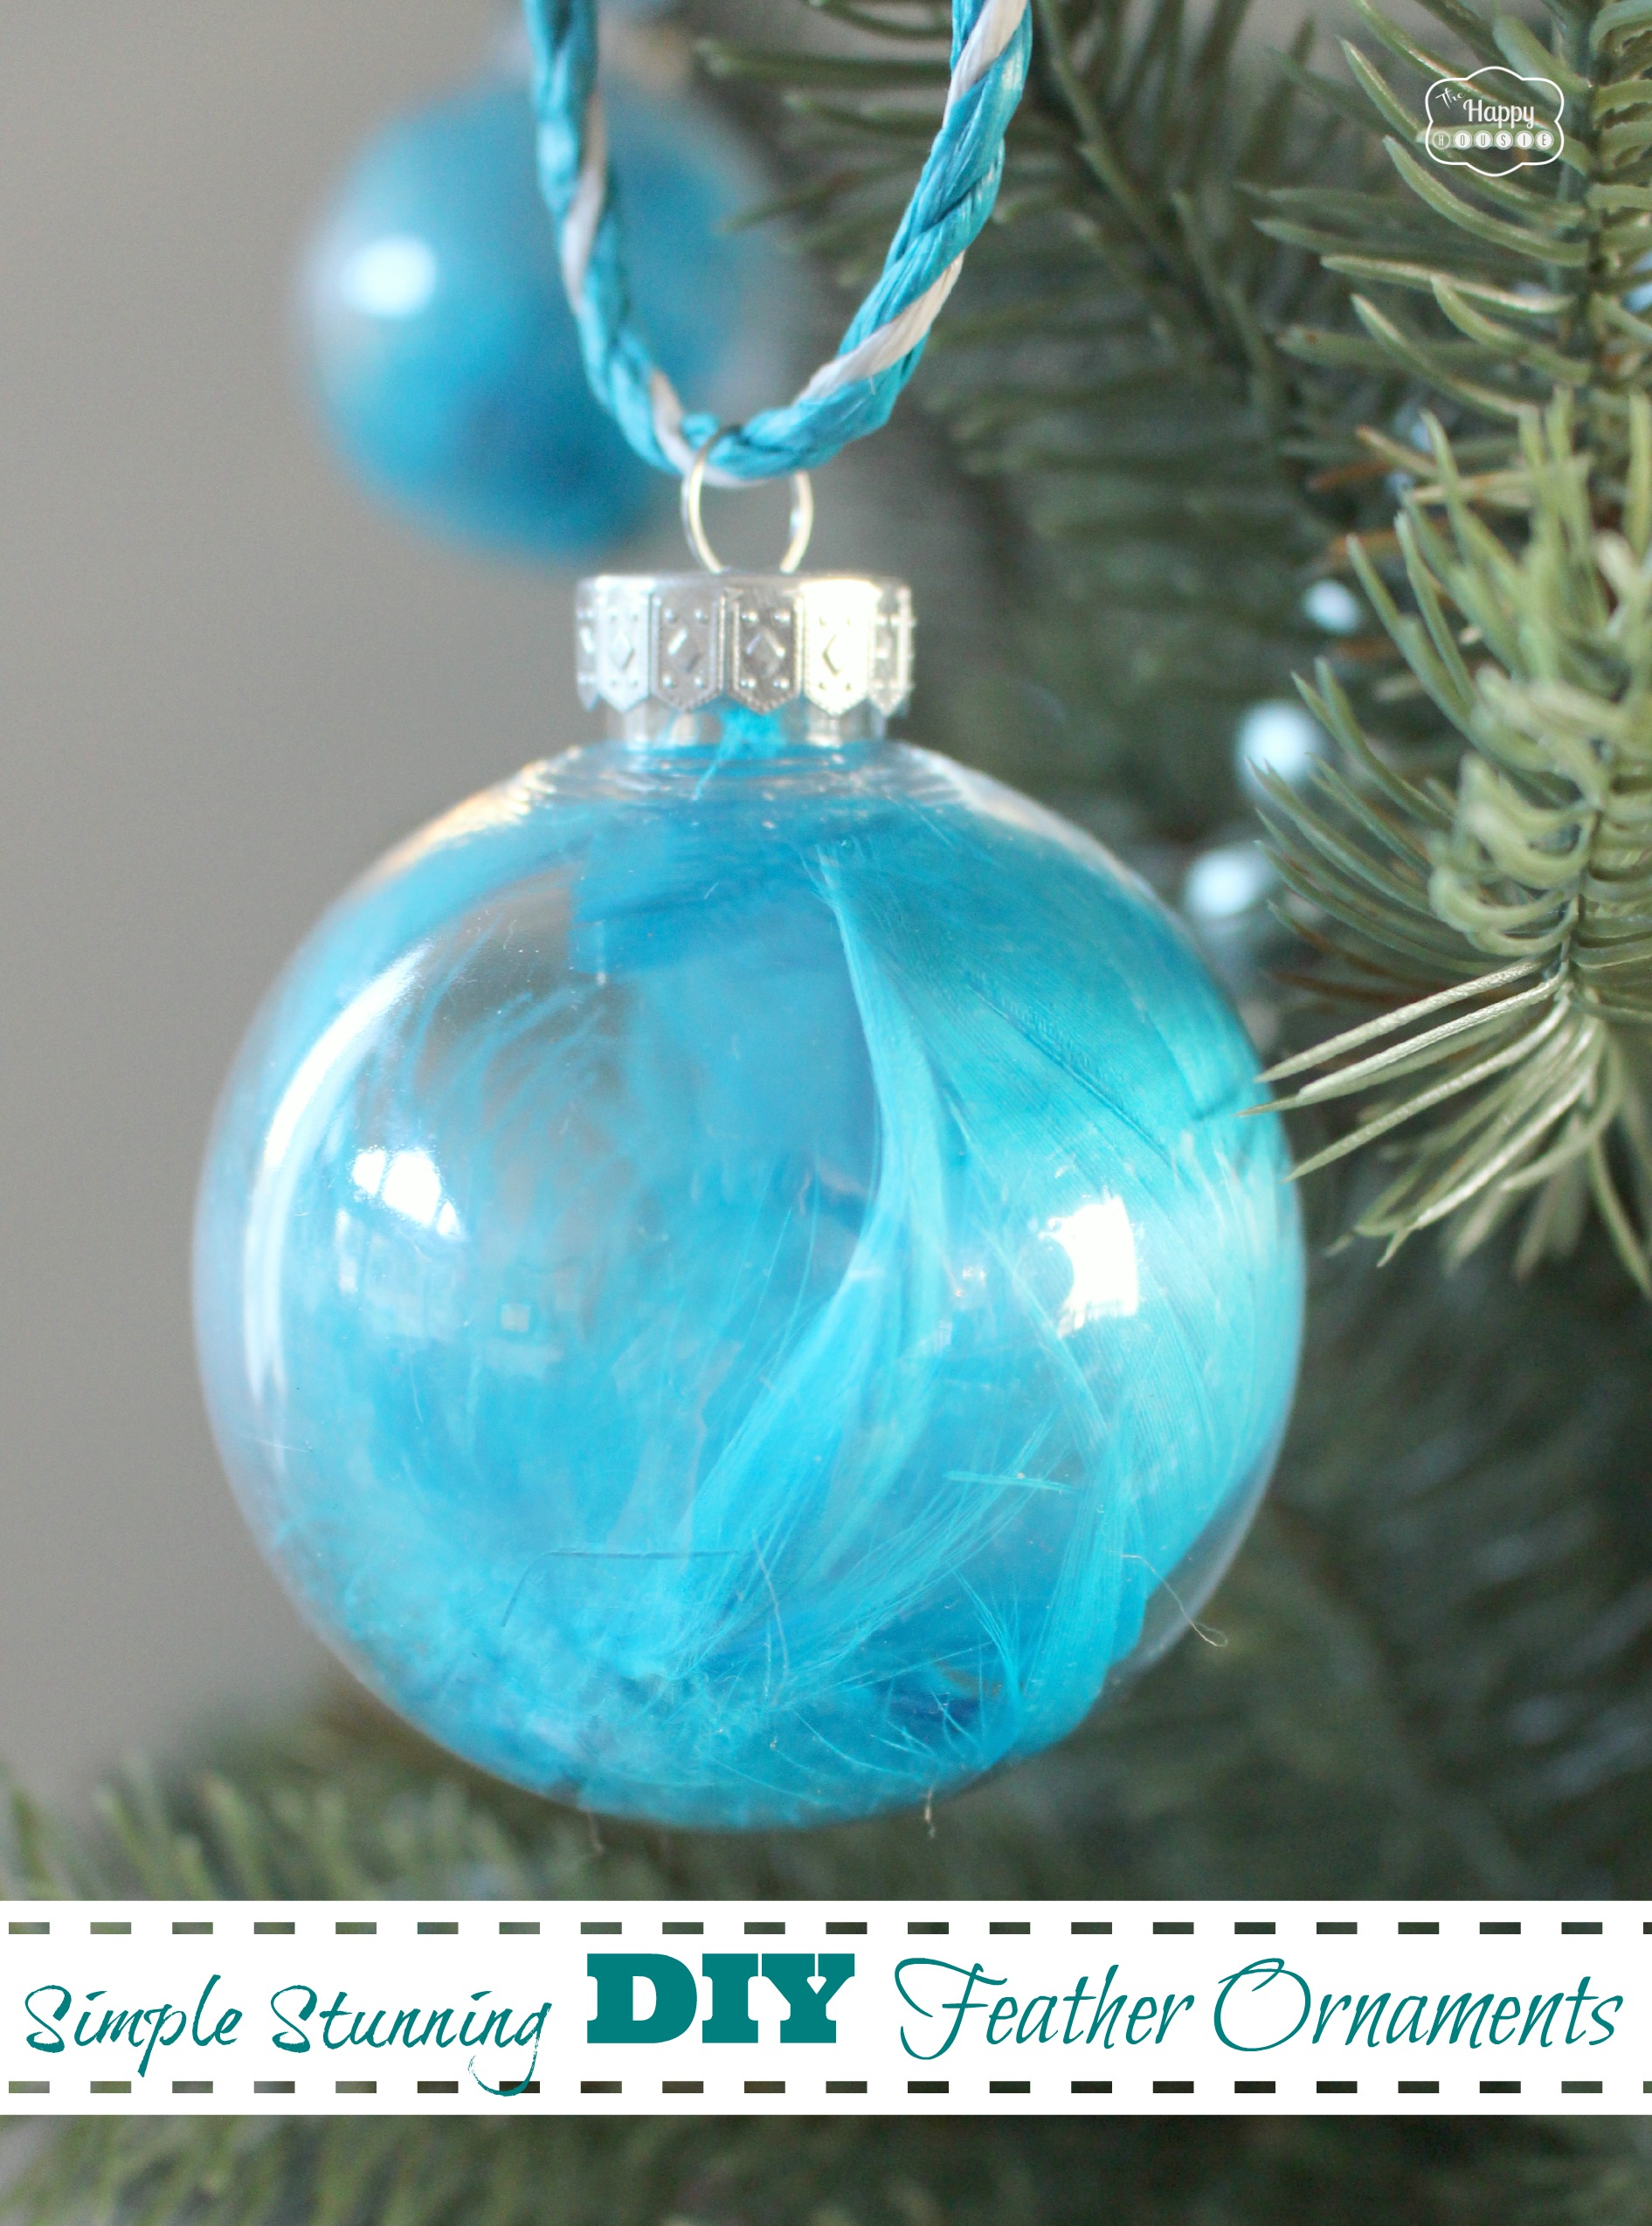 Simple Stunning DIY Feather Ornaments